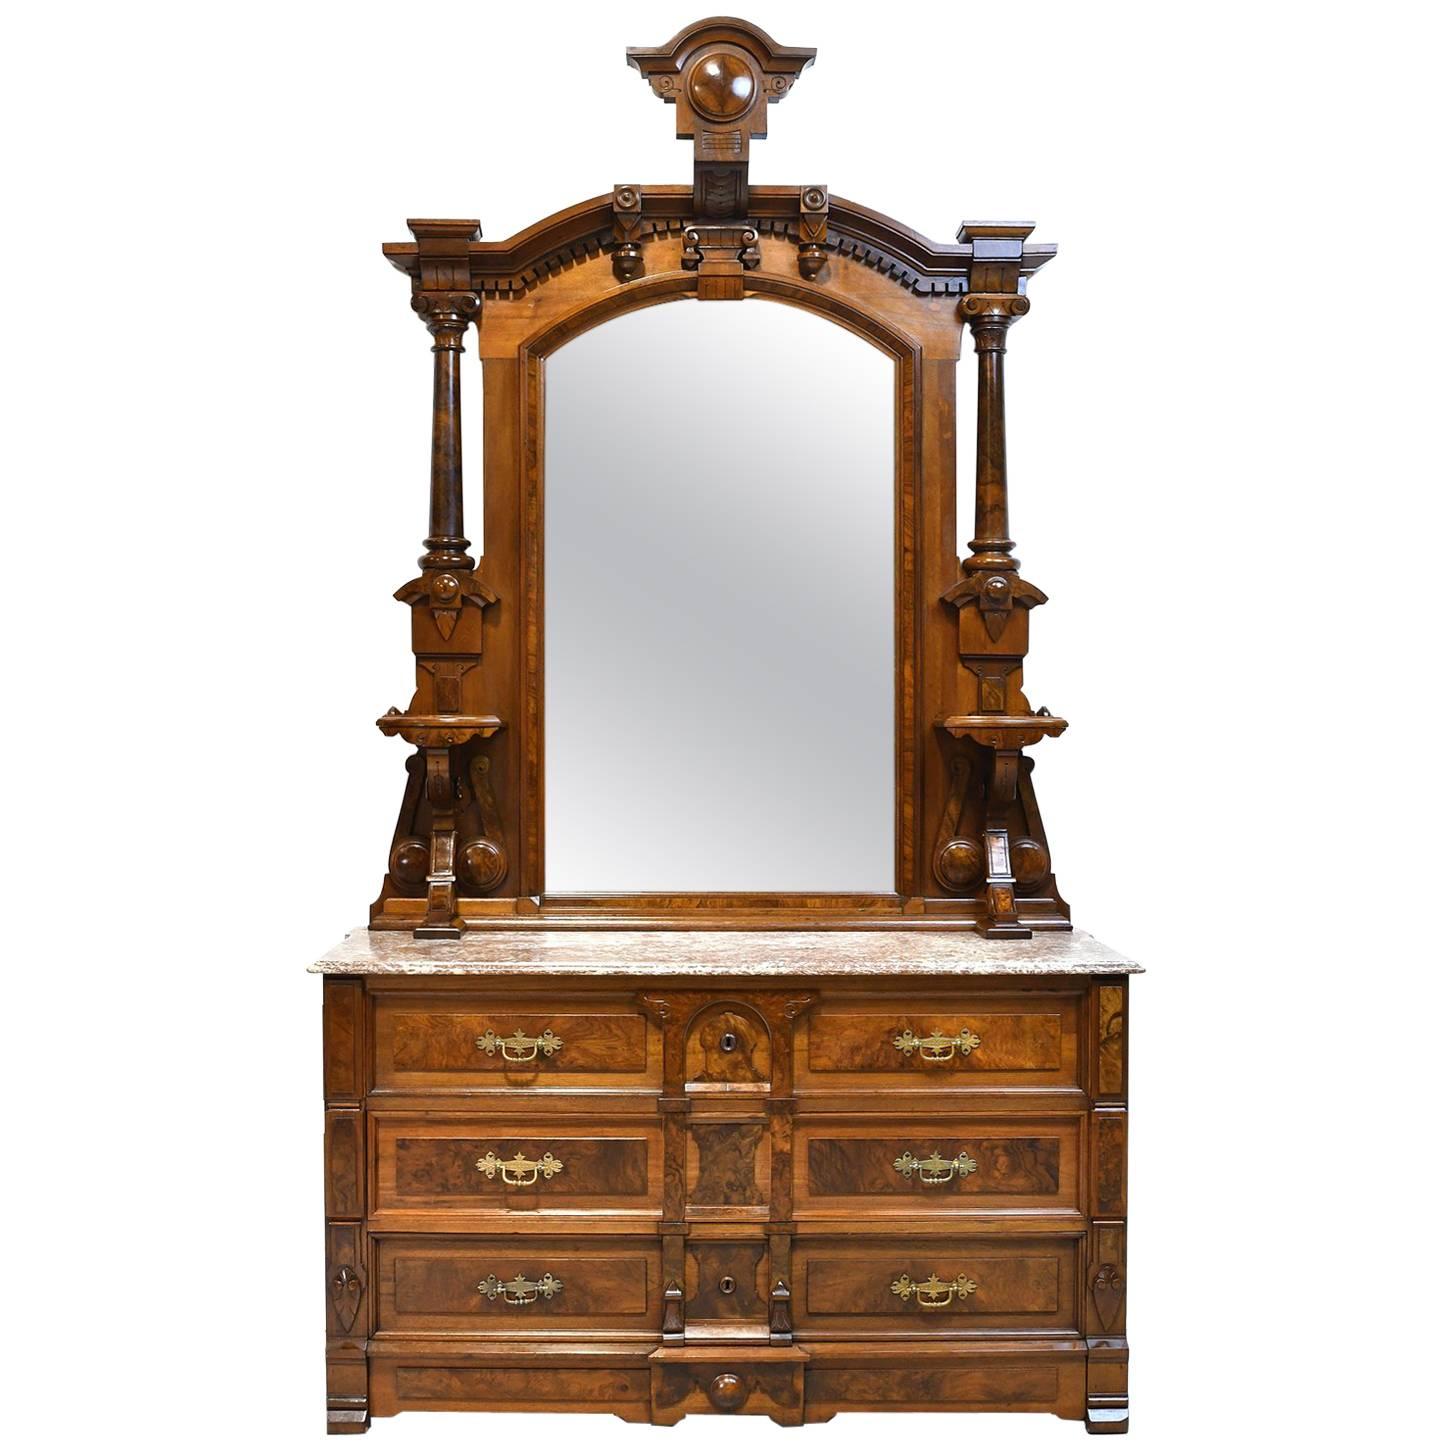 American Aesthetic Movement Walnut Vanity with Mirror and Marble Top, circa 1870